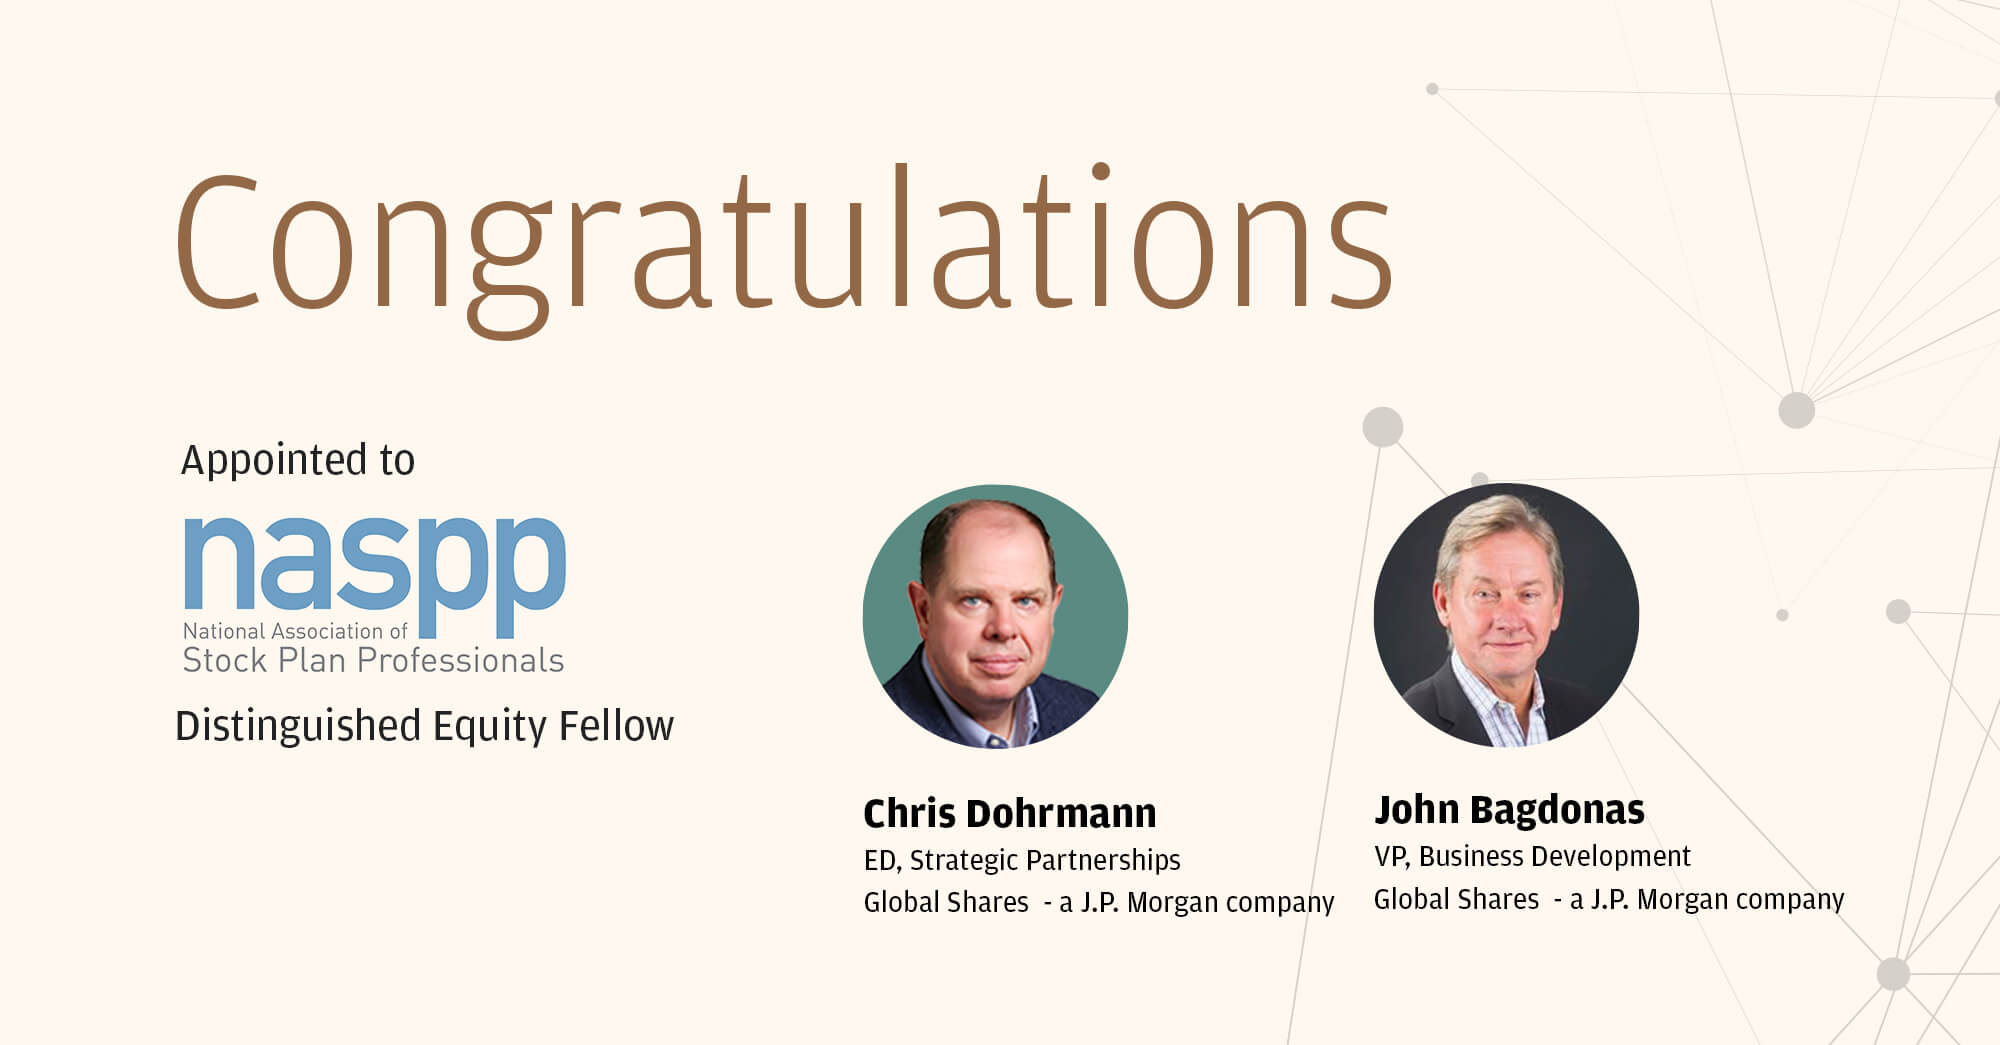 Congratulations Chris Dohrmann & John Bagdonas on being appointed NASPP Distinguished Equity Fellows.